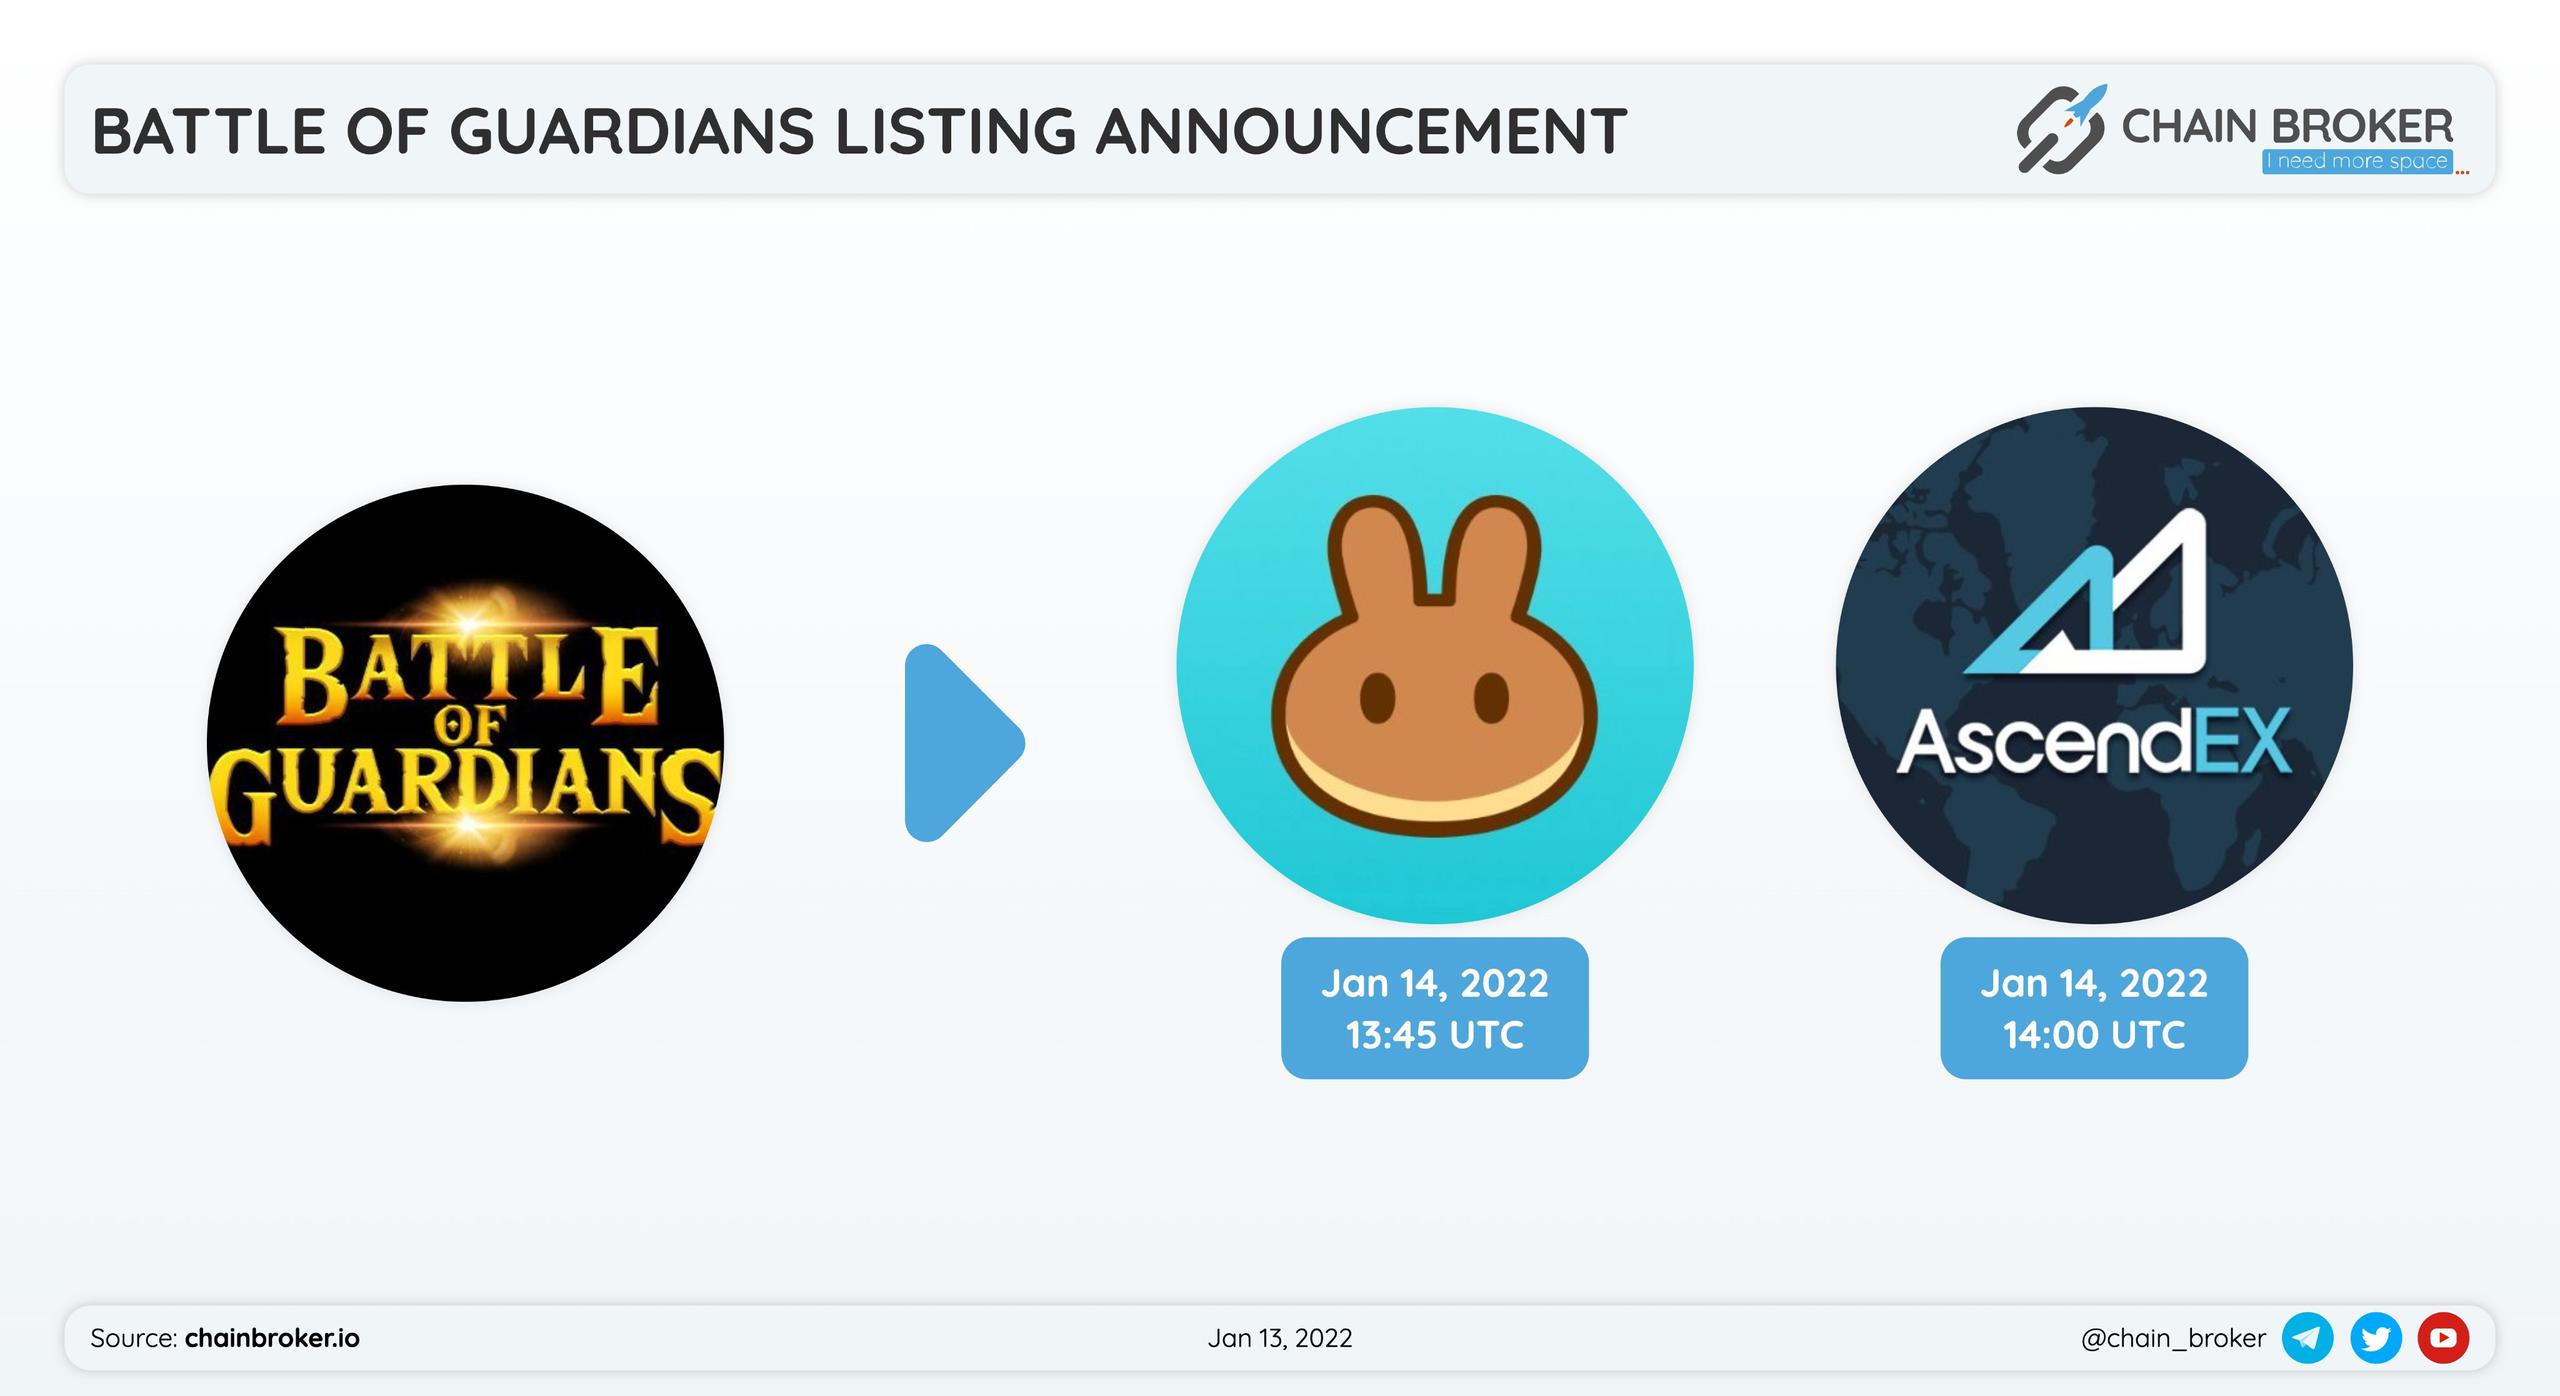 Battle of Guardians has partnered with AscendEX and PancakeSwap for a token launch.